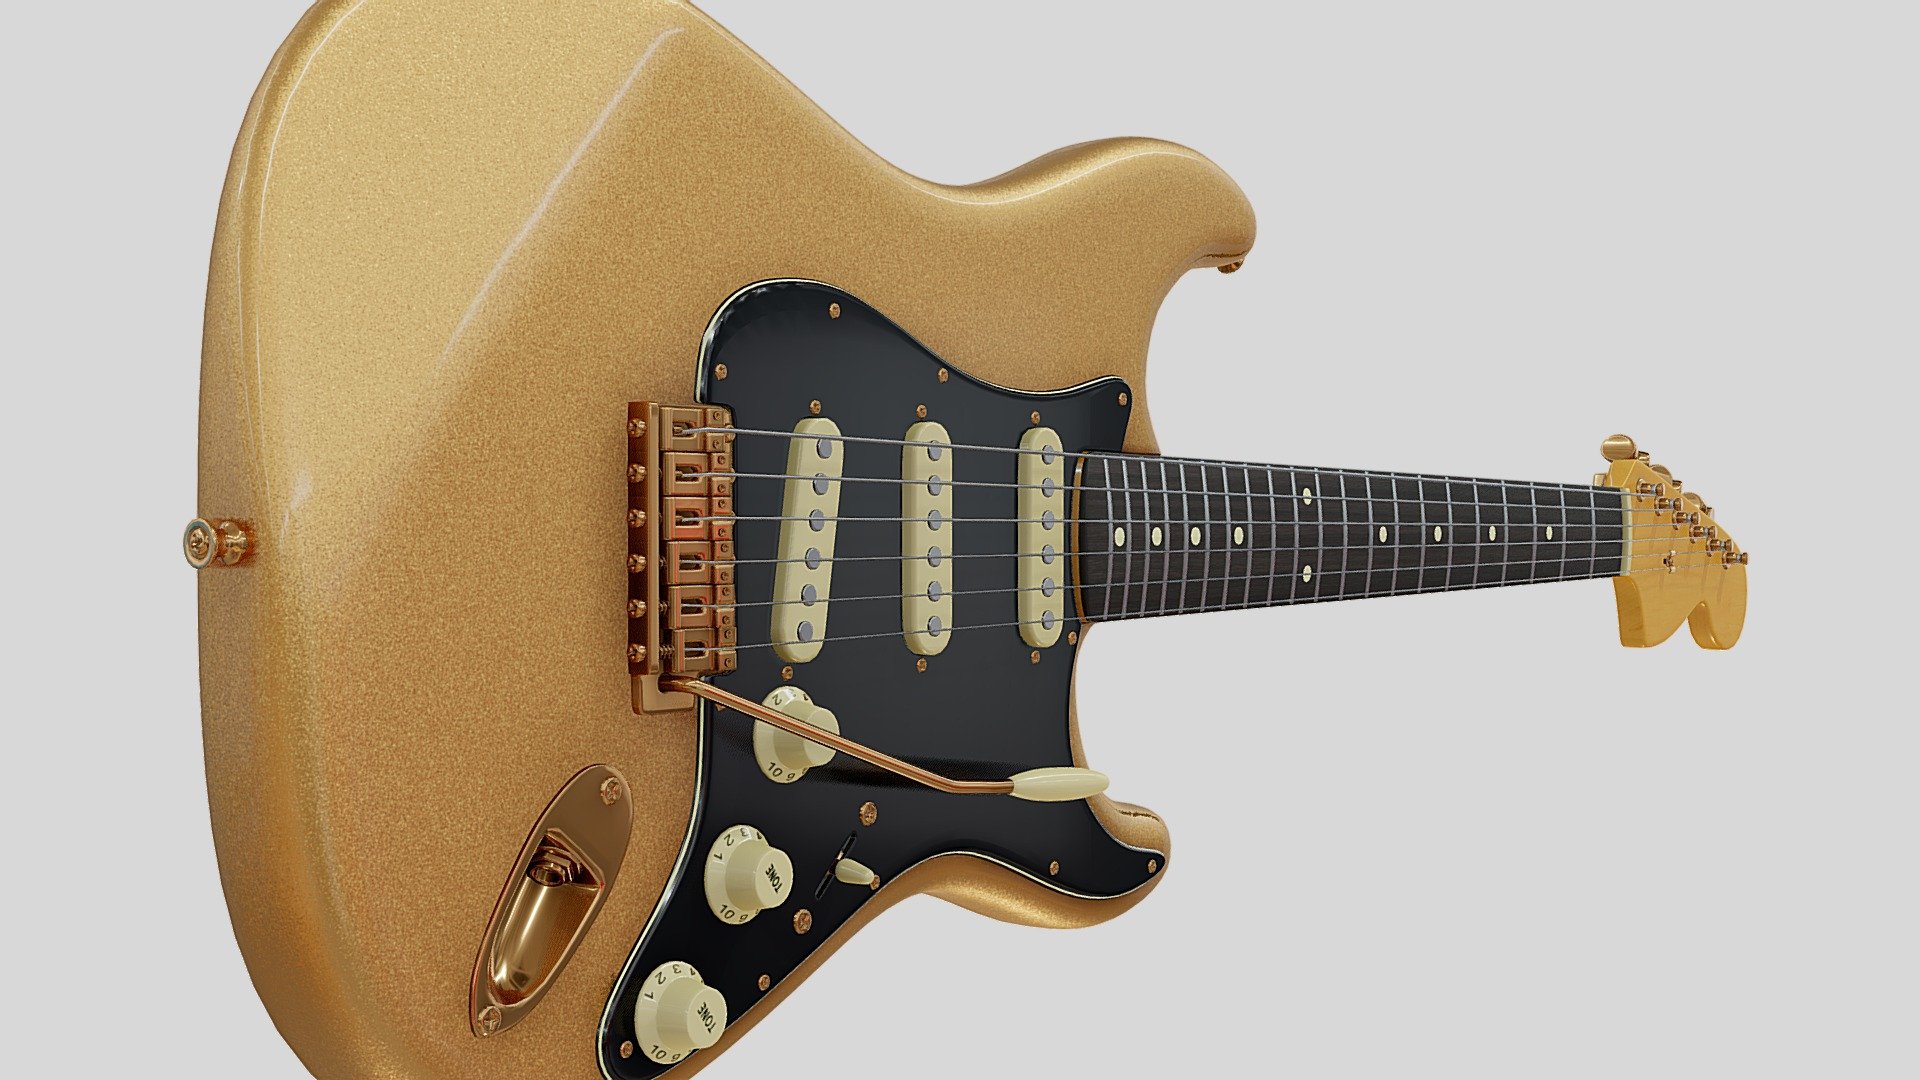 Strat electric guitar 3d model in gold flakes color
 with gold furniture, rosewood fretboard and black pickguard - Generic Strat Electric Guitar Gold - Buy Royalty Free 3D model by Eugene Korolev (@eugene.korolev) 3d model